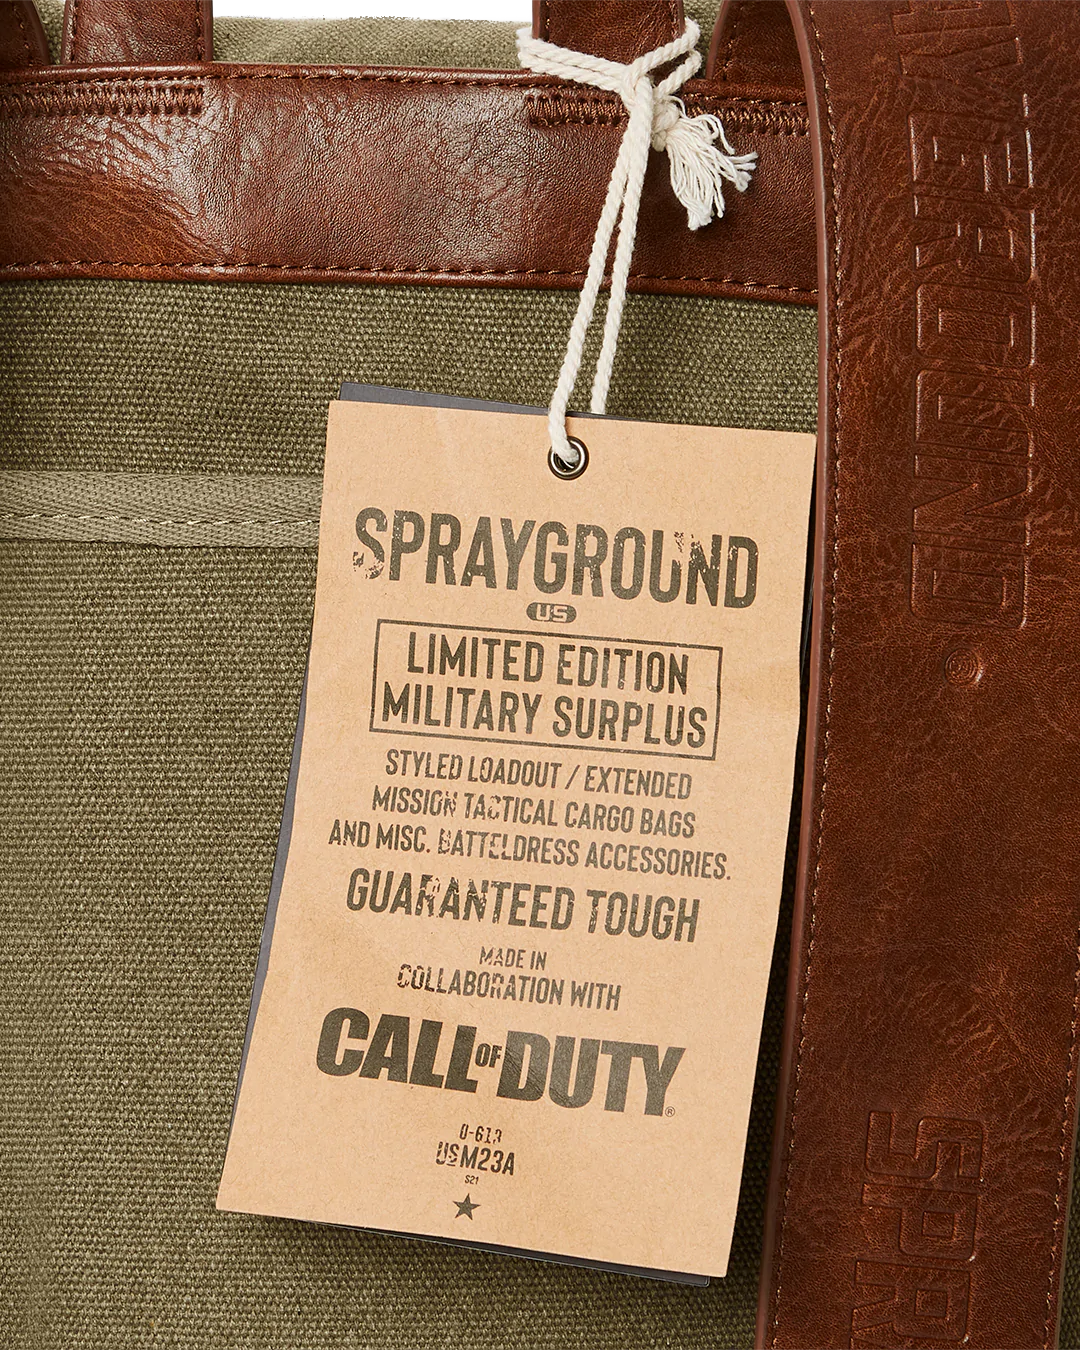 CALL OF DUTY PATCHES MONTE CARLO BACKPACK